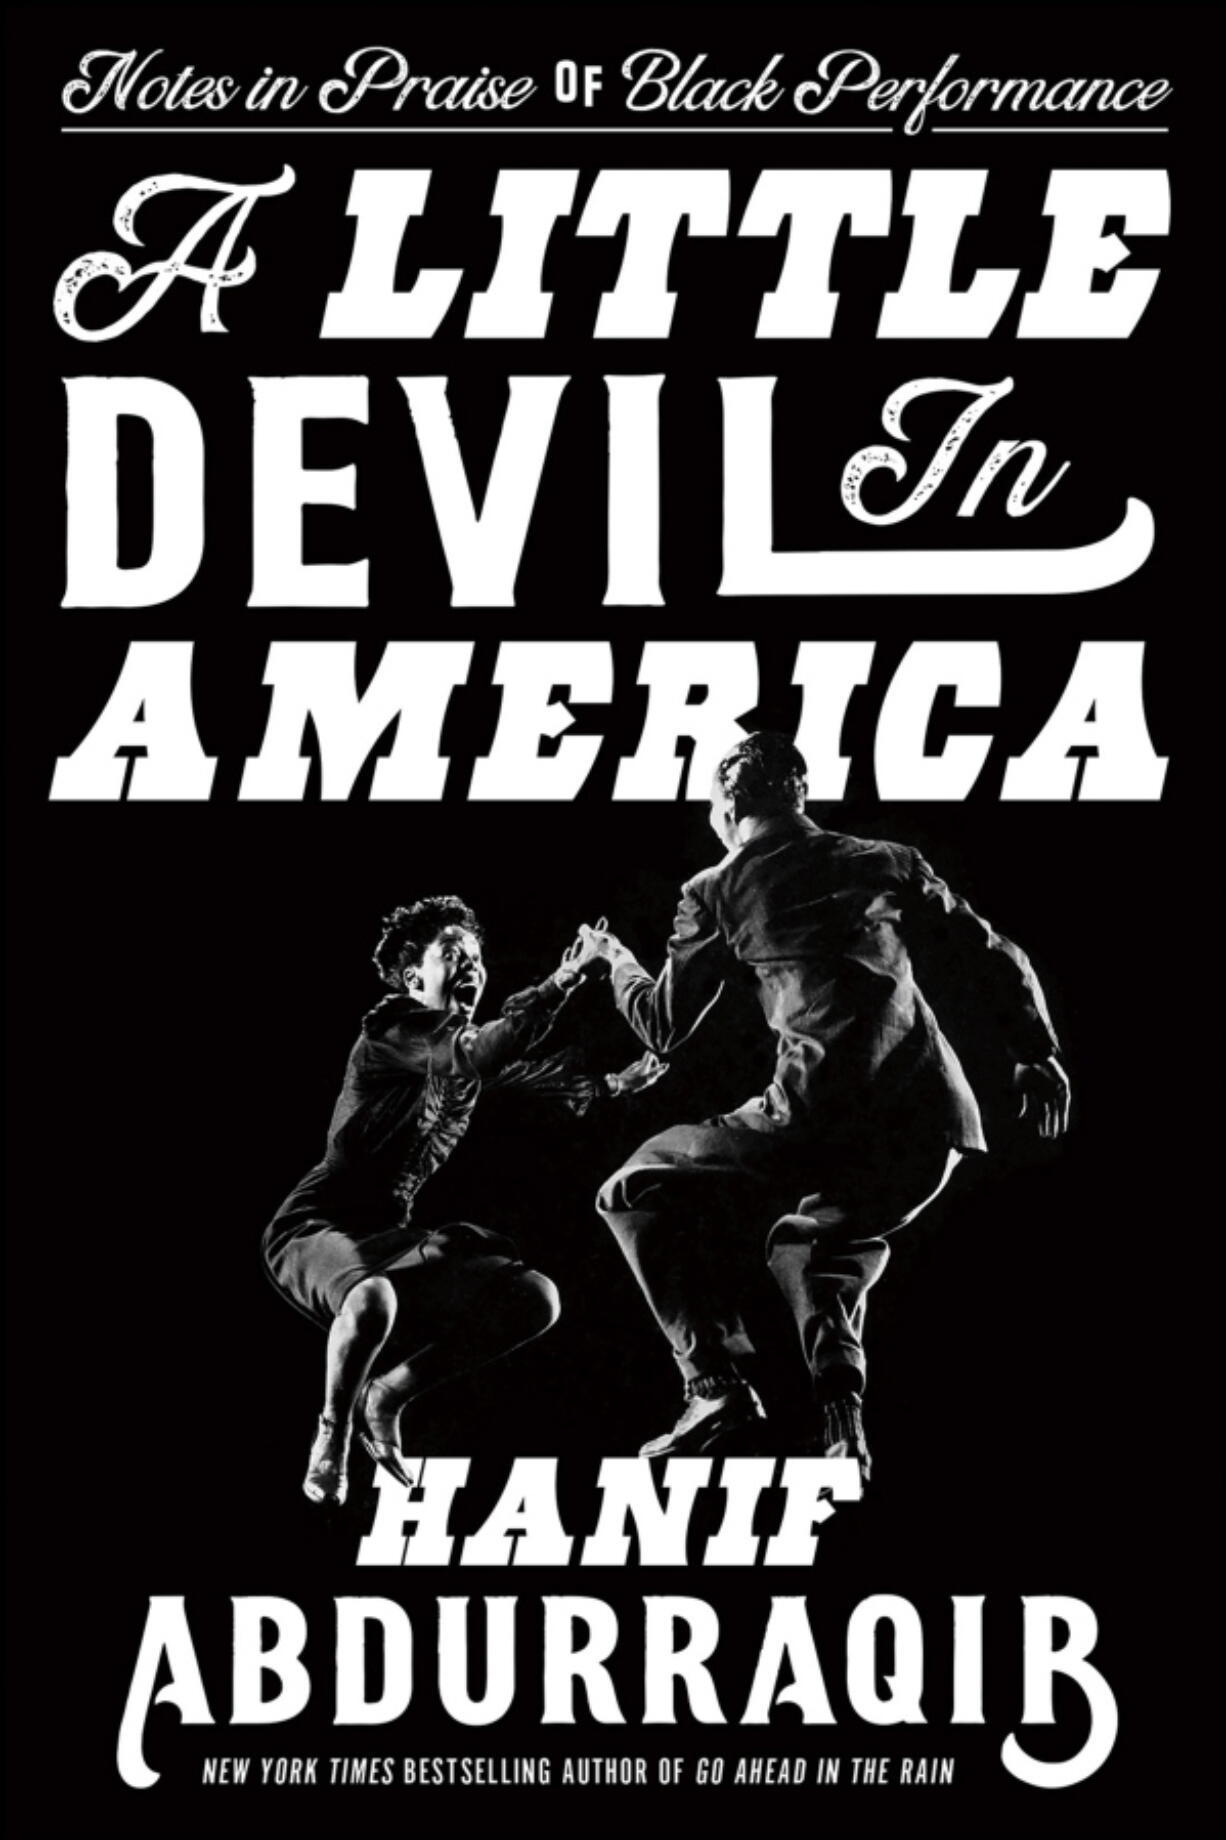 This cover image provided by Random House shows "A Little Devil in America: Notes in Praise of Black Performance" by Hanif Abdurraqib.